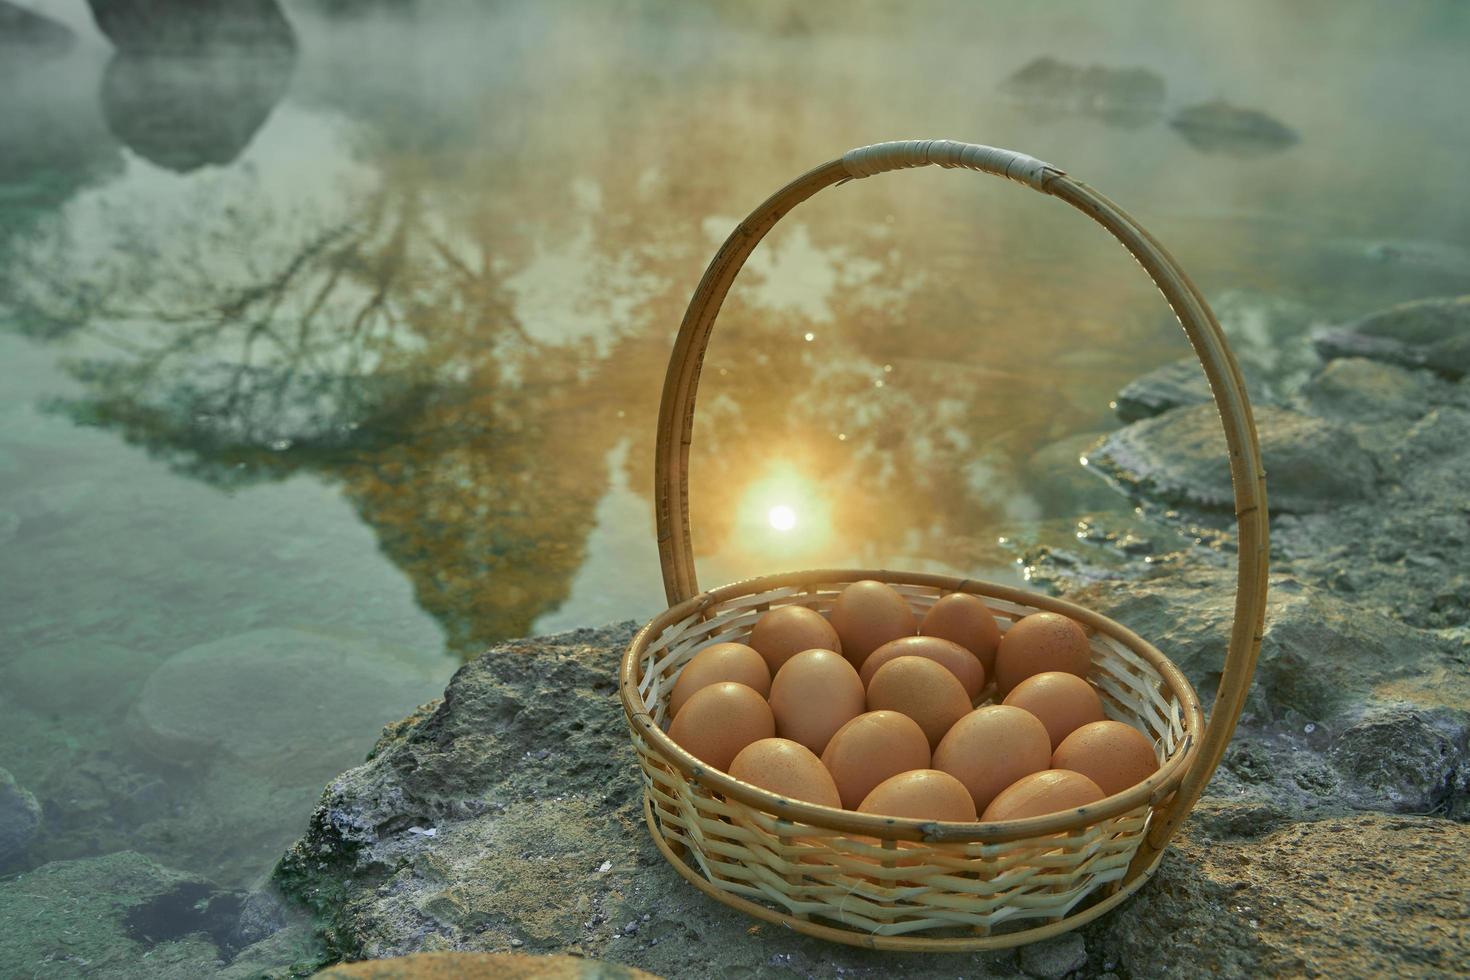 Onsen Hot Spring Eggs in National Park Chae Son, Lampang Thailand, the traditional method of boiling eggs in the natural hot springs in Thailand. Japanese hot spring steam boil eggs inside basket photo